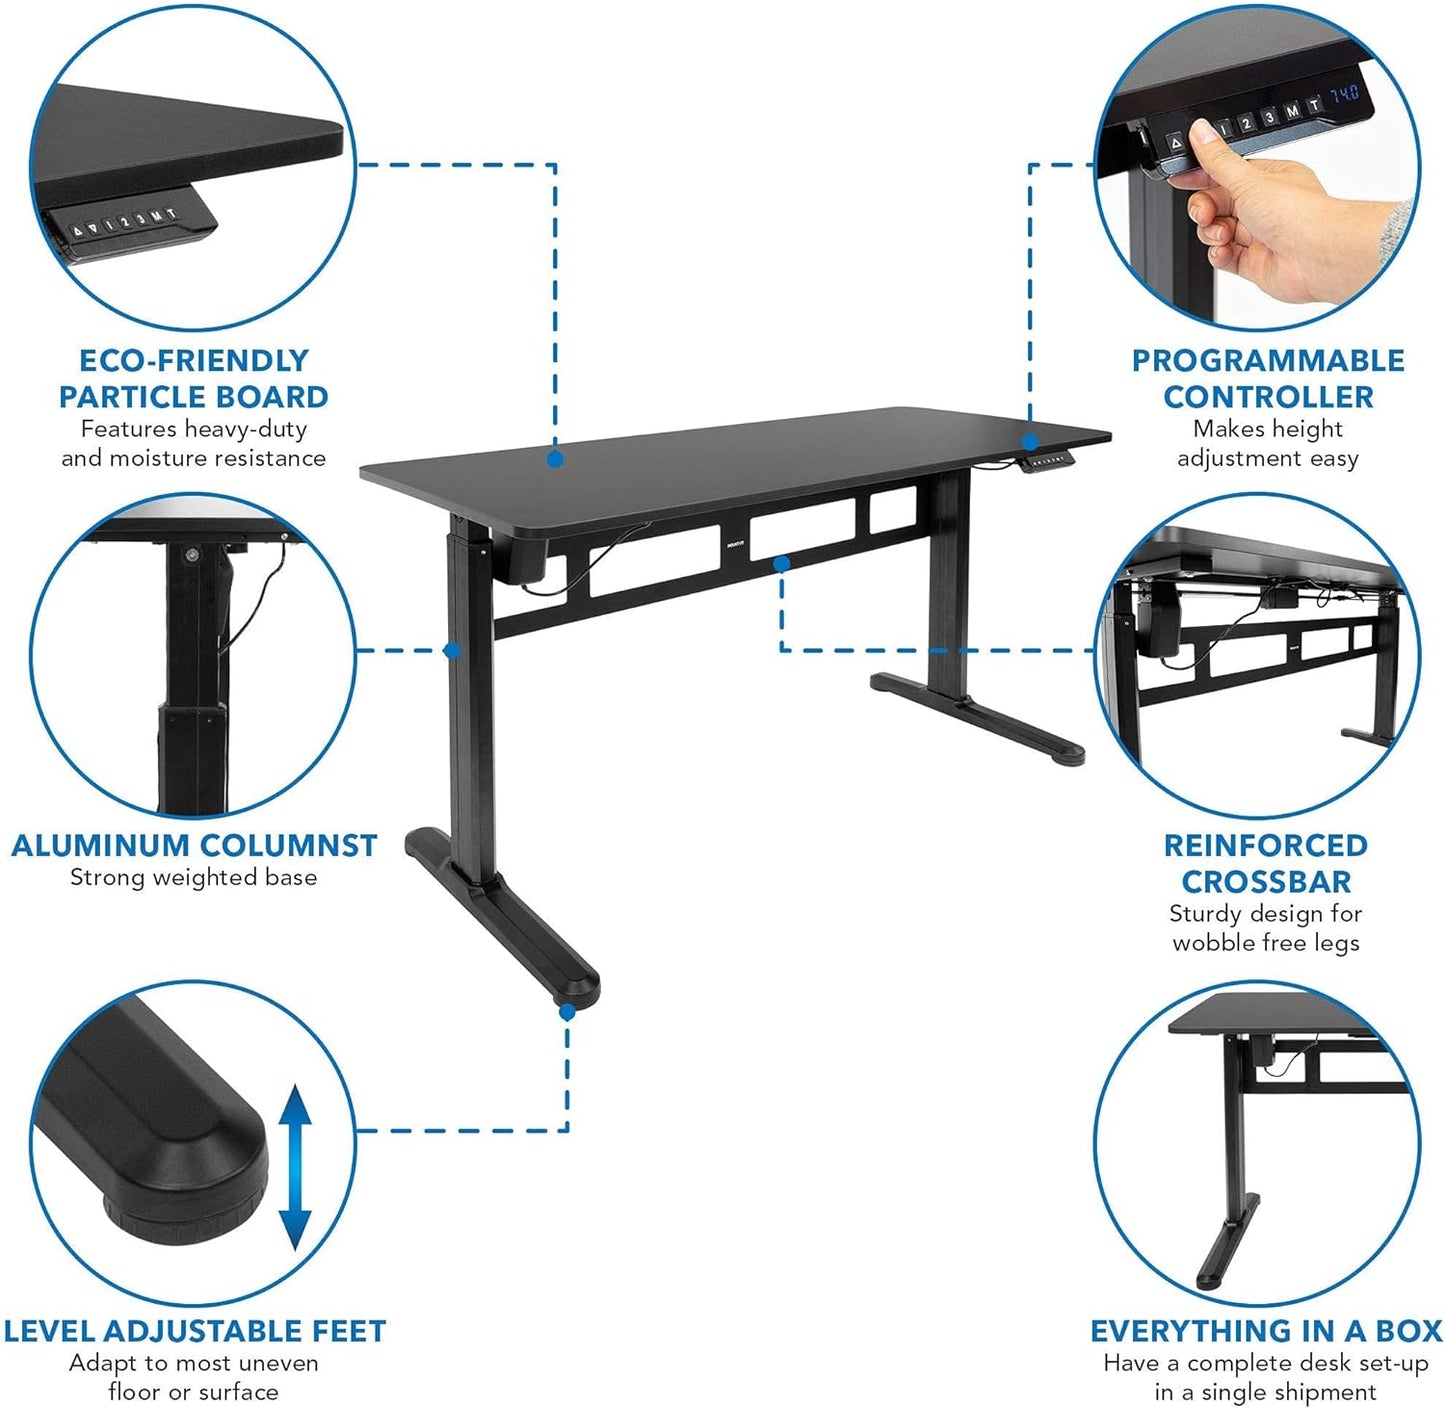 Electric Standing Desk [55.1" X 23.6"] Memory Control Panel - Adjustable Tabletop - Turcom LED Desk Lamp with USB Charging Port and anti Fatigue Floor Mat